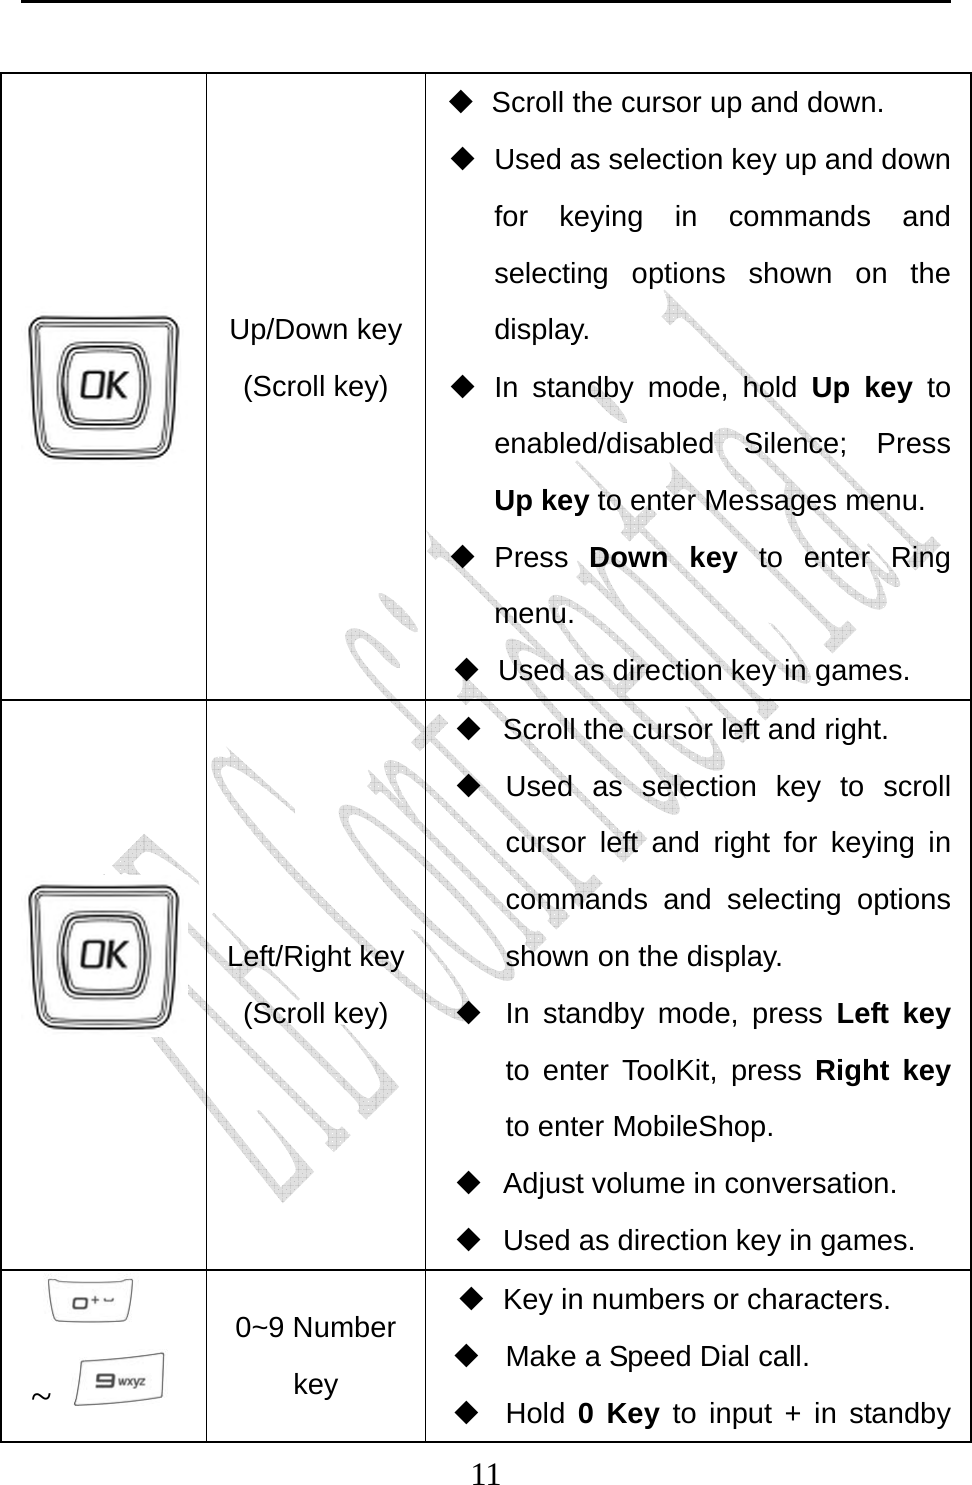                              11 Up/Down key(Scroll key)    Scroll the cursor up and down.   Used as selection key up and down for keying in commands and selecting options shown on the display.  In standby mode, hold Up key to enabled/disabled Silence; Press Up key to enter Messages menu.  Press Down key to enter Ring menu.    Used as direction key in games.   Left/Right key(Scroll key)   Scroll the cursor left and right.  Used as selection key to scroll cursor left and right for keying in commands and selecting options shown on the display.   In standby mode, press Left key to enter ToolKit, press Right key to enter MobileShop.    Adjust volume in conversation.   Used as direction key in games.  ~   0~9 Number key   Key in numbers or characters.   Make a Speed Dial call.  Hold 0 Key to input + in standby 